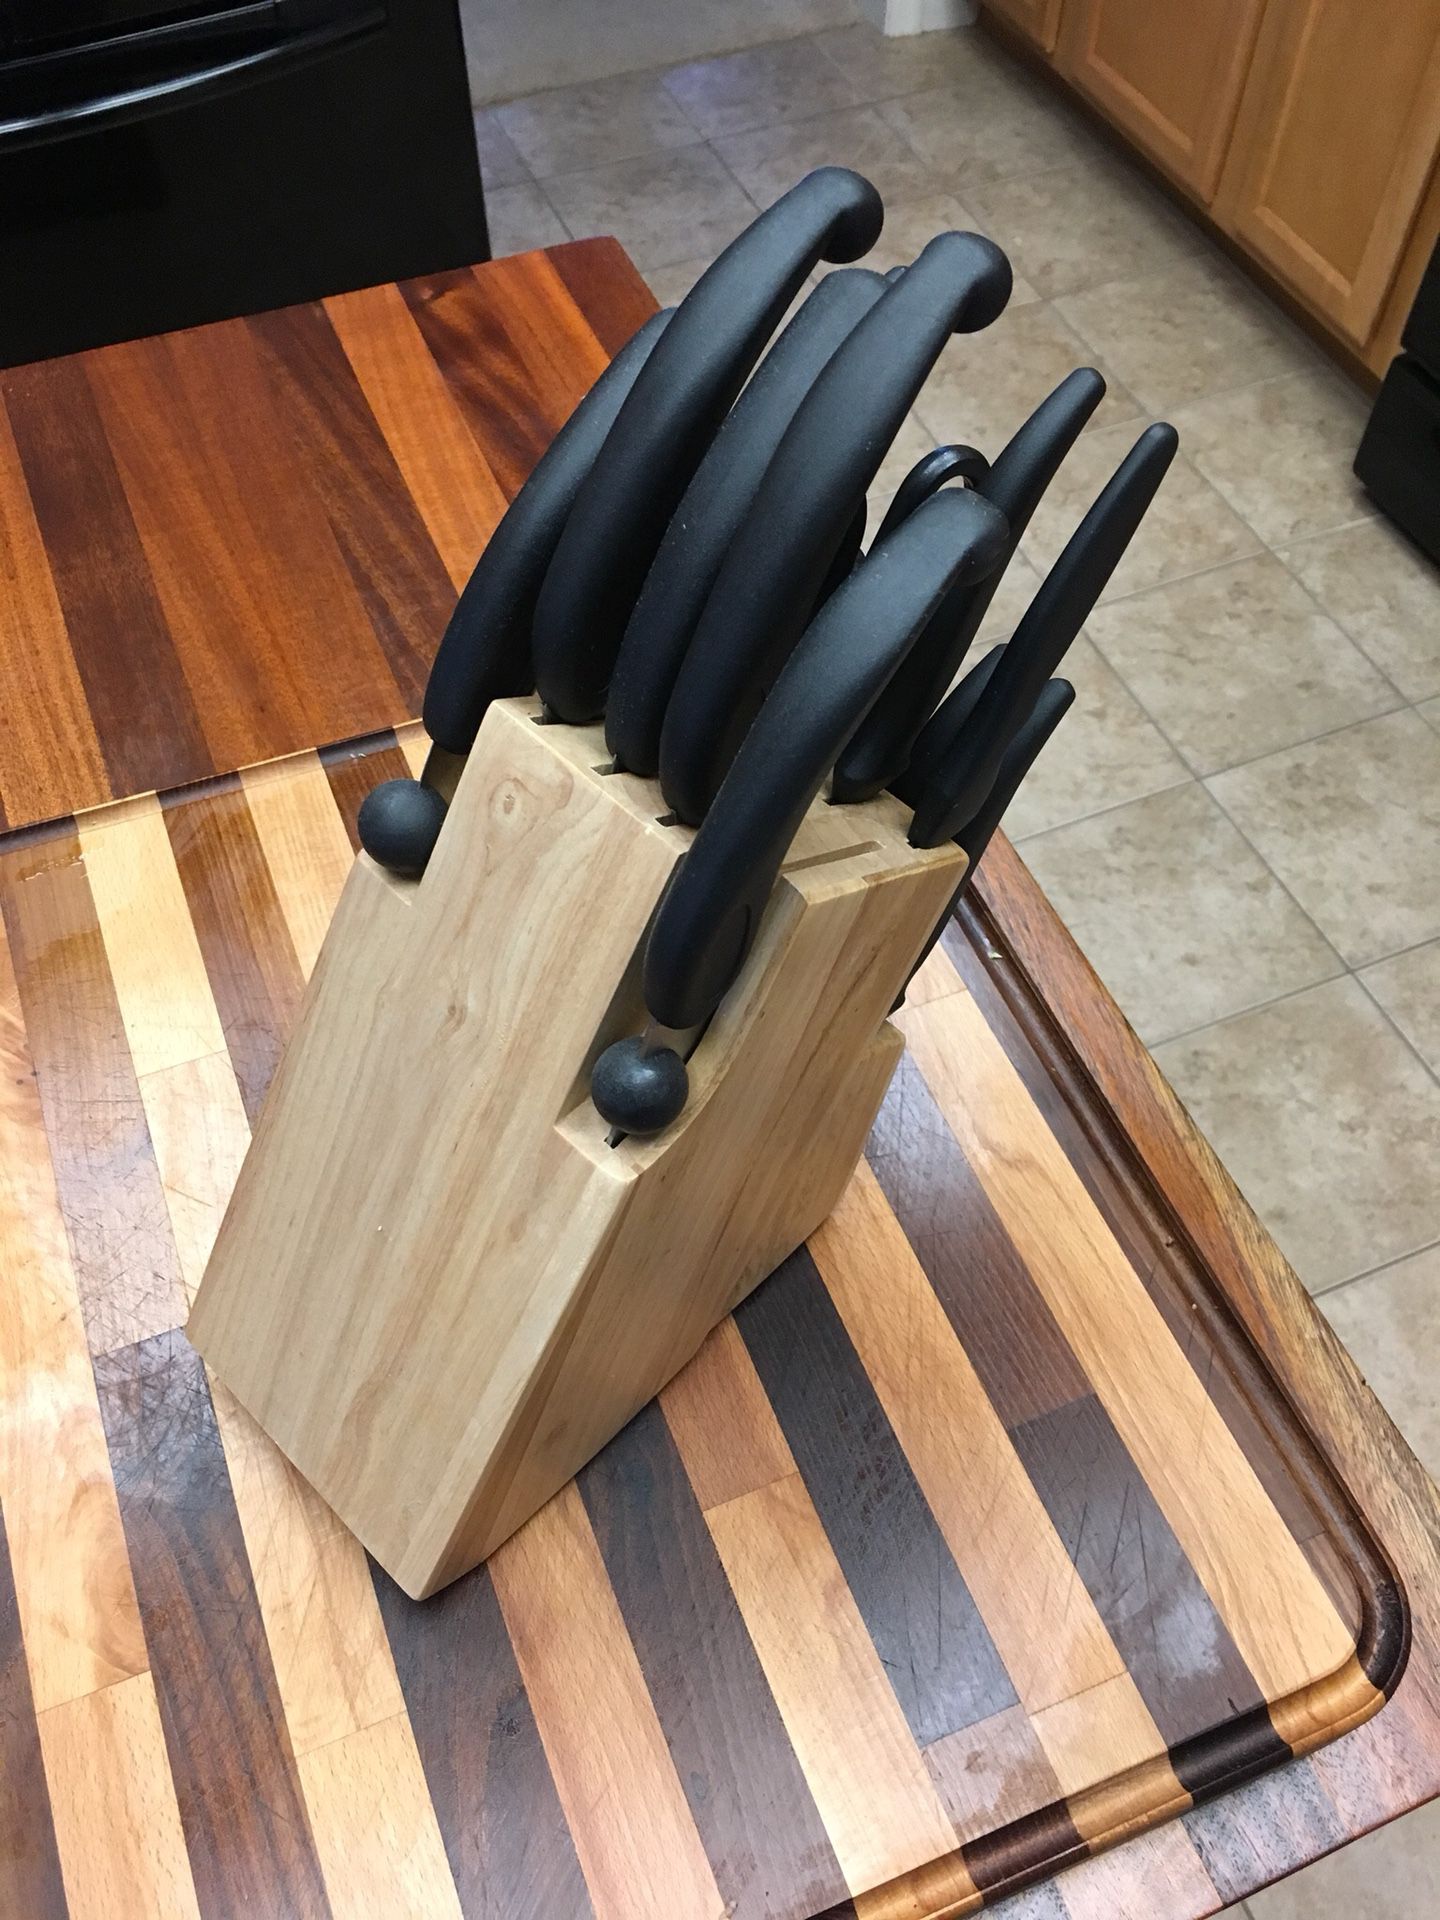 Miracle Blade III Knife Set - 15 Pieces with Knife Block - FREE knives for  life included (just pay s&h) for Sale in Virginia Beach, VA - OfferUp